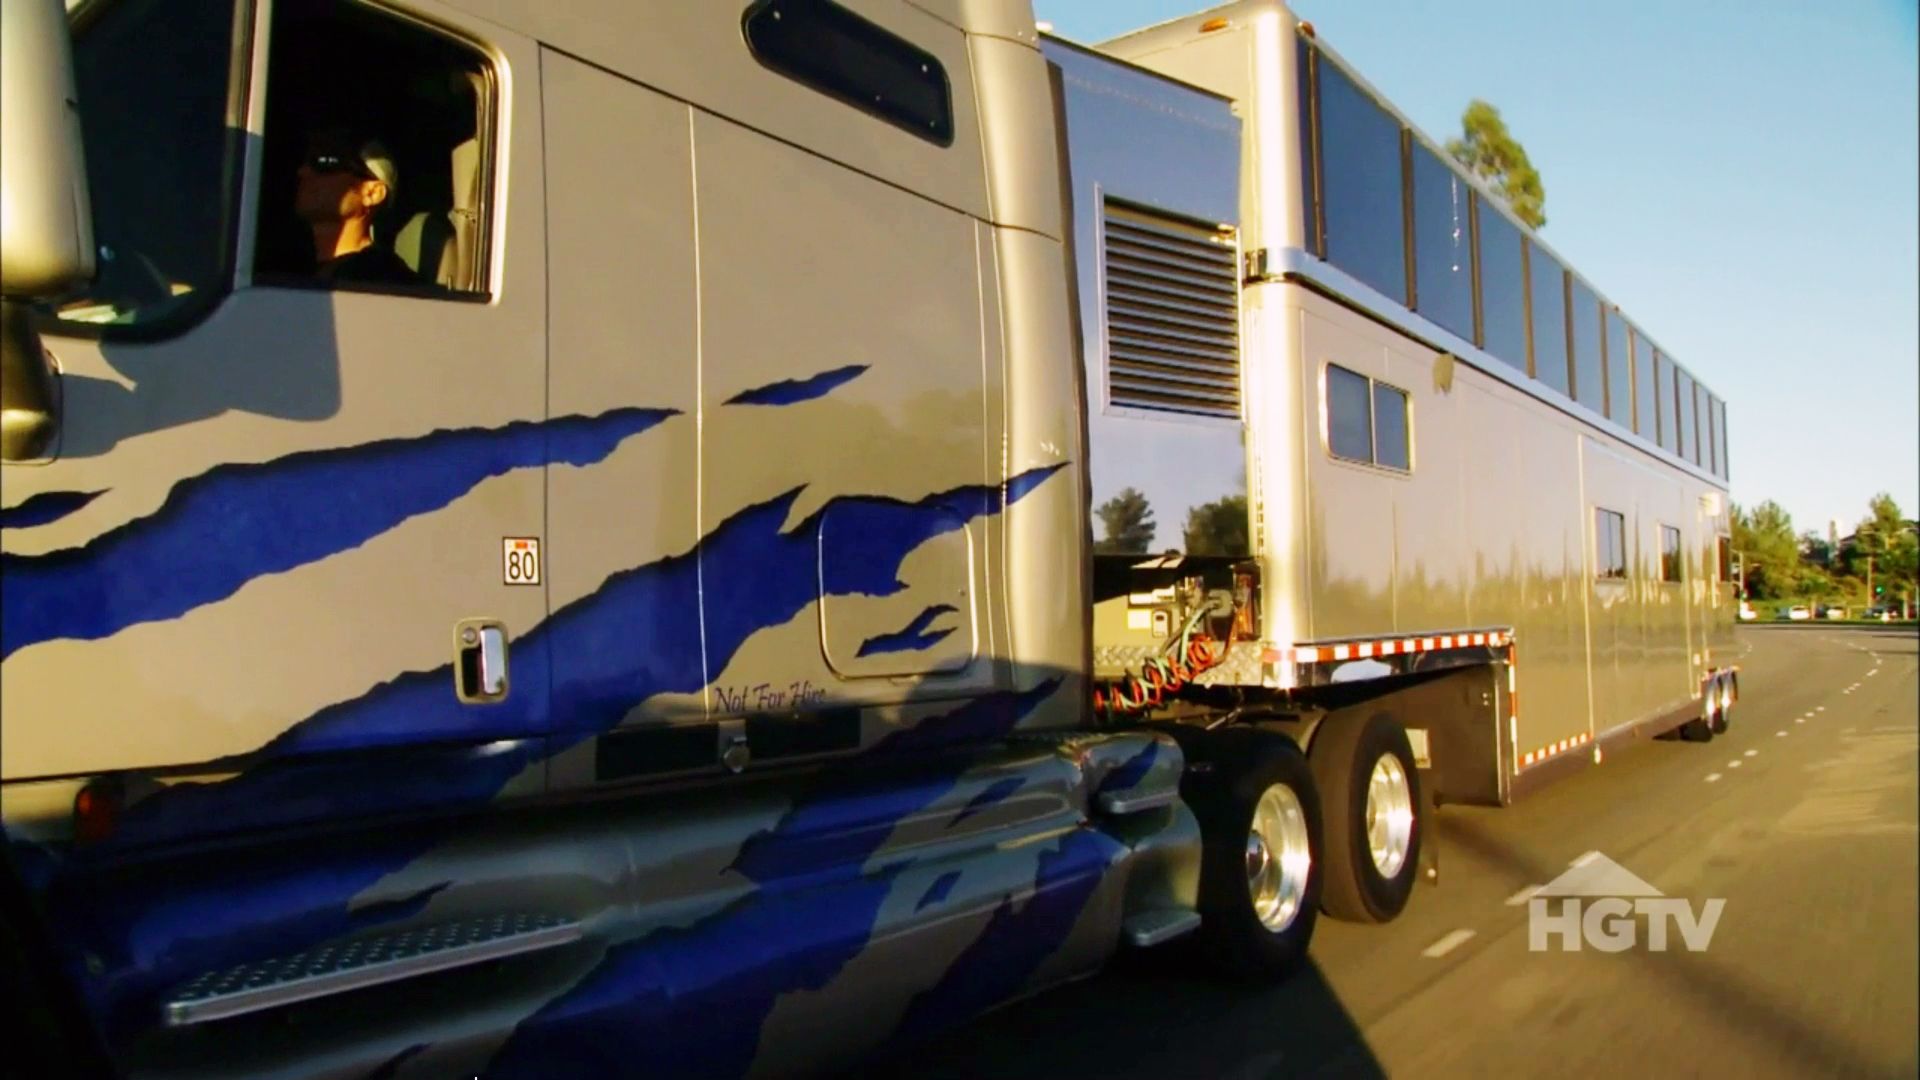 Vin Diesel's Mobile Home Hits The Road